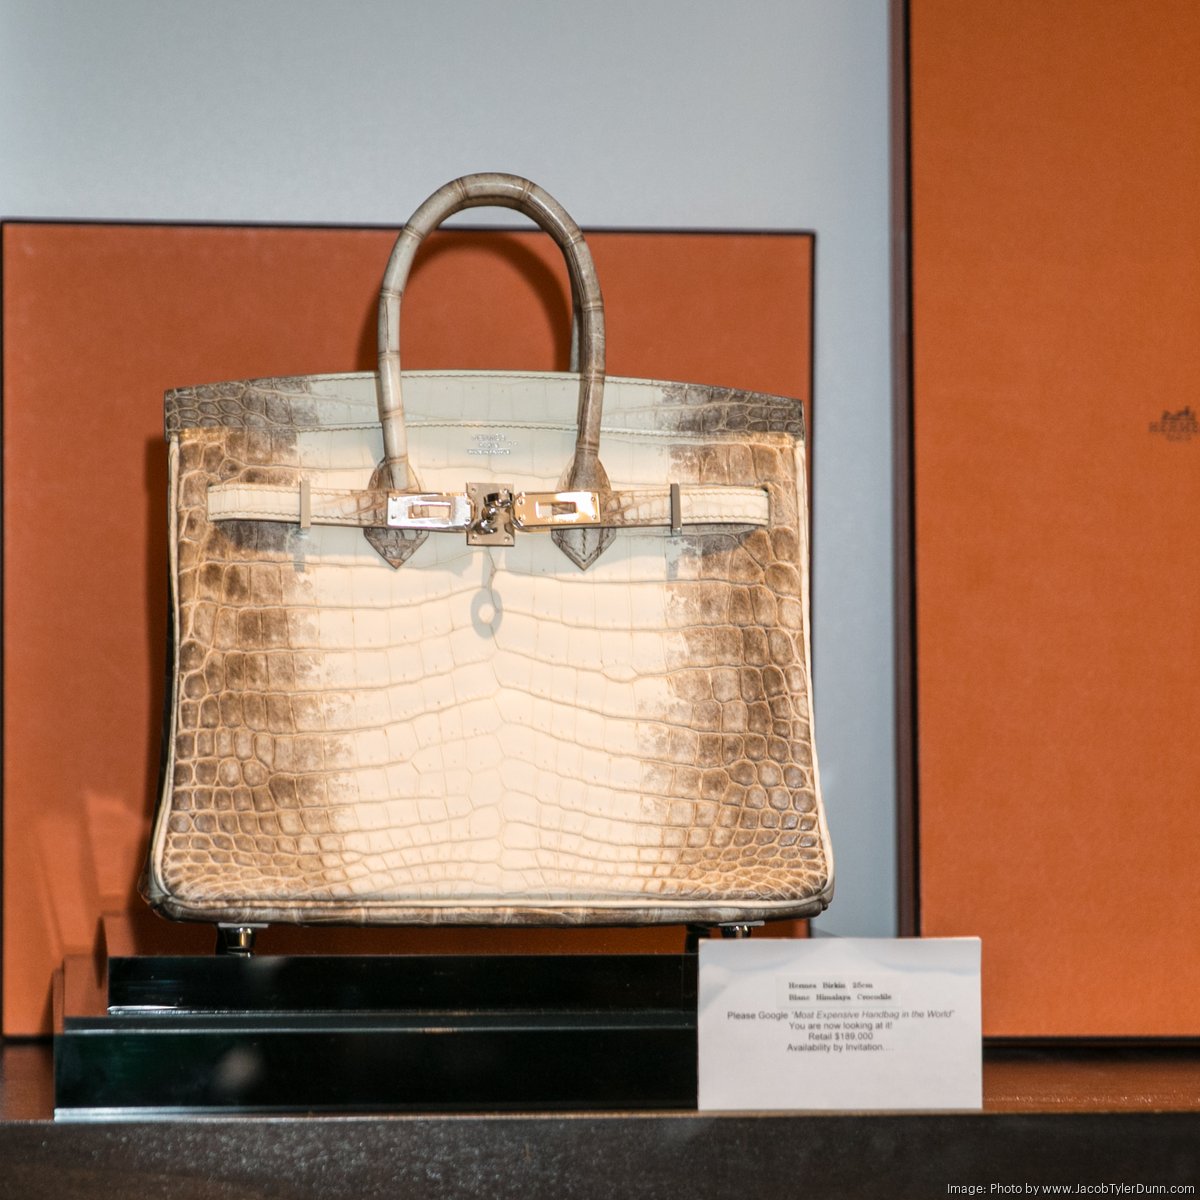 Who Owns The Top 3 Most Expensive Birkin Bags In The World? One Is